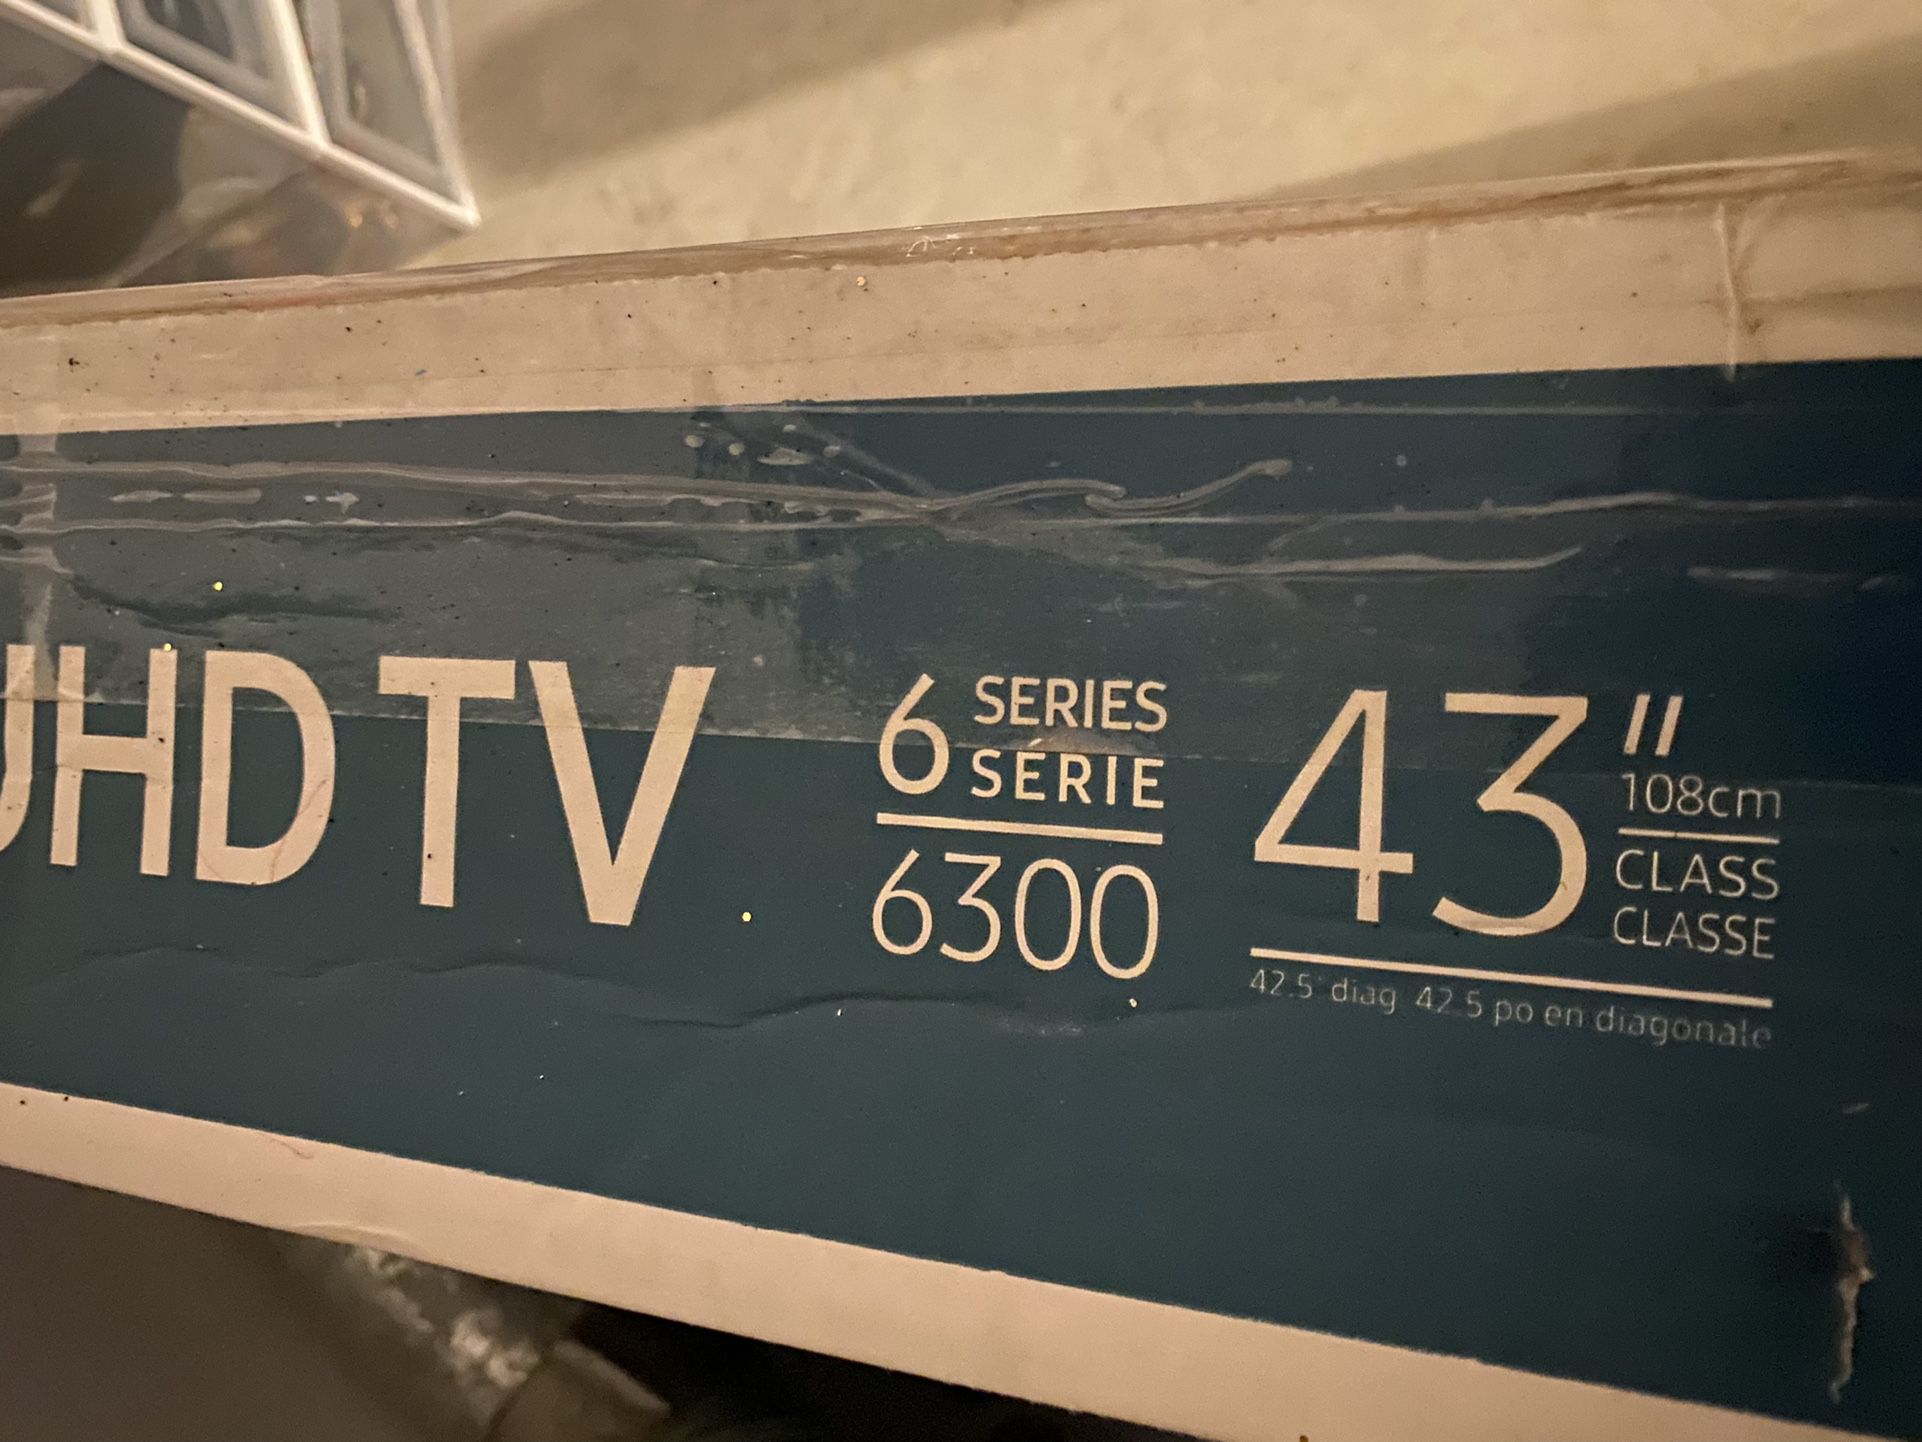 Samsung TV 6300 43 Inch for Sale in Tustin, CA - OfferUp